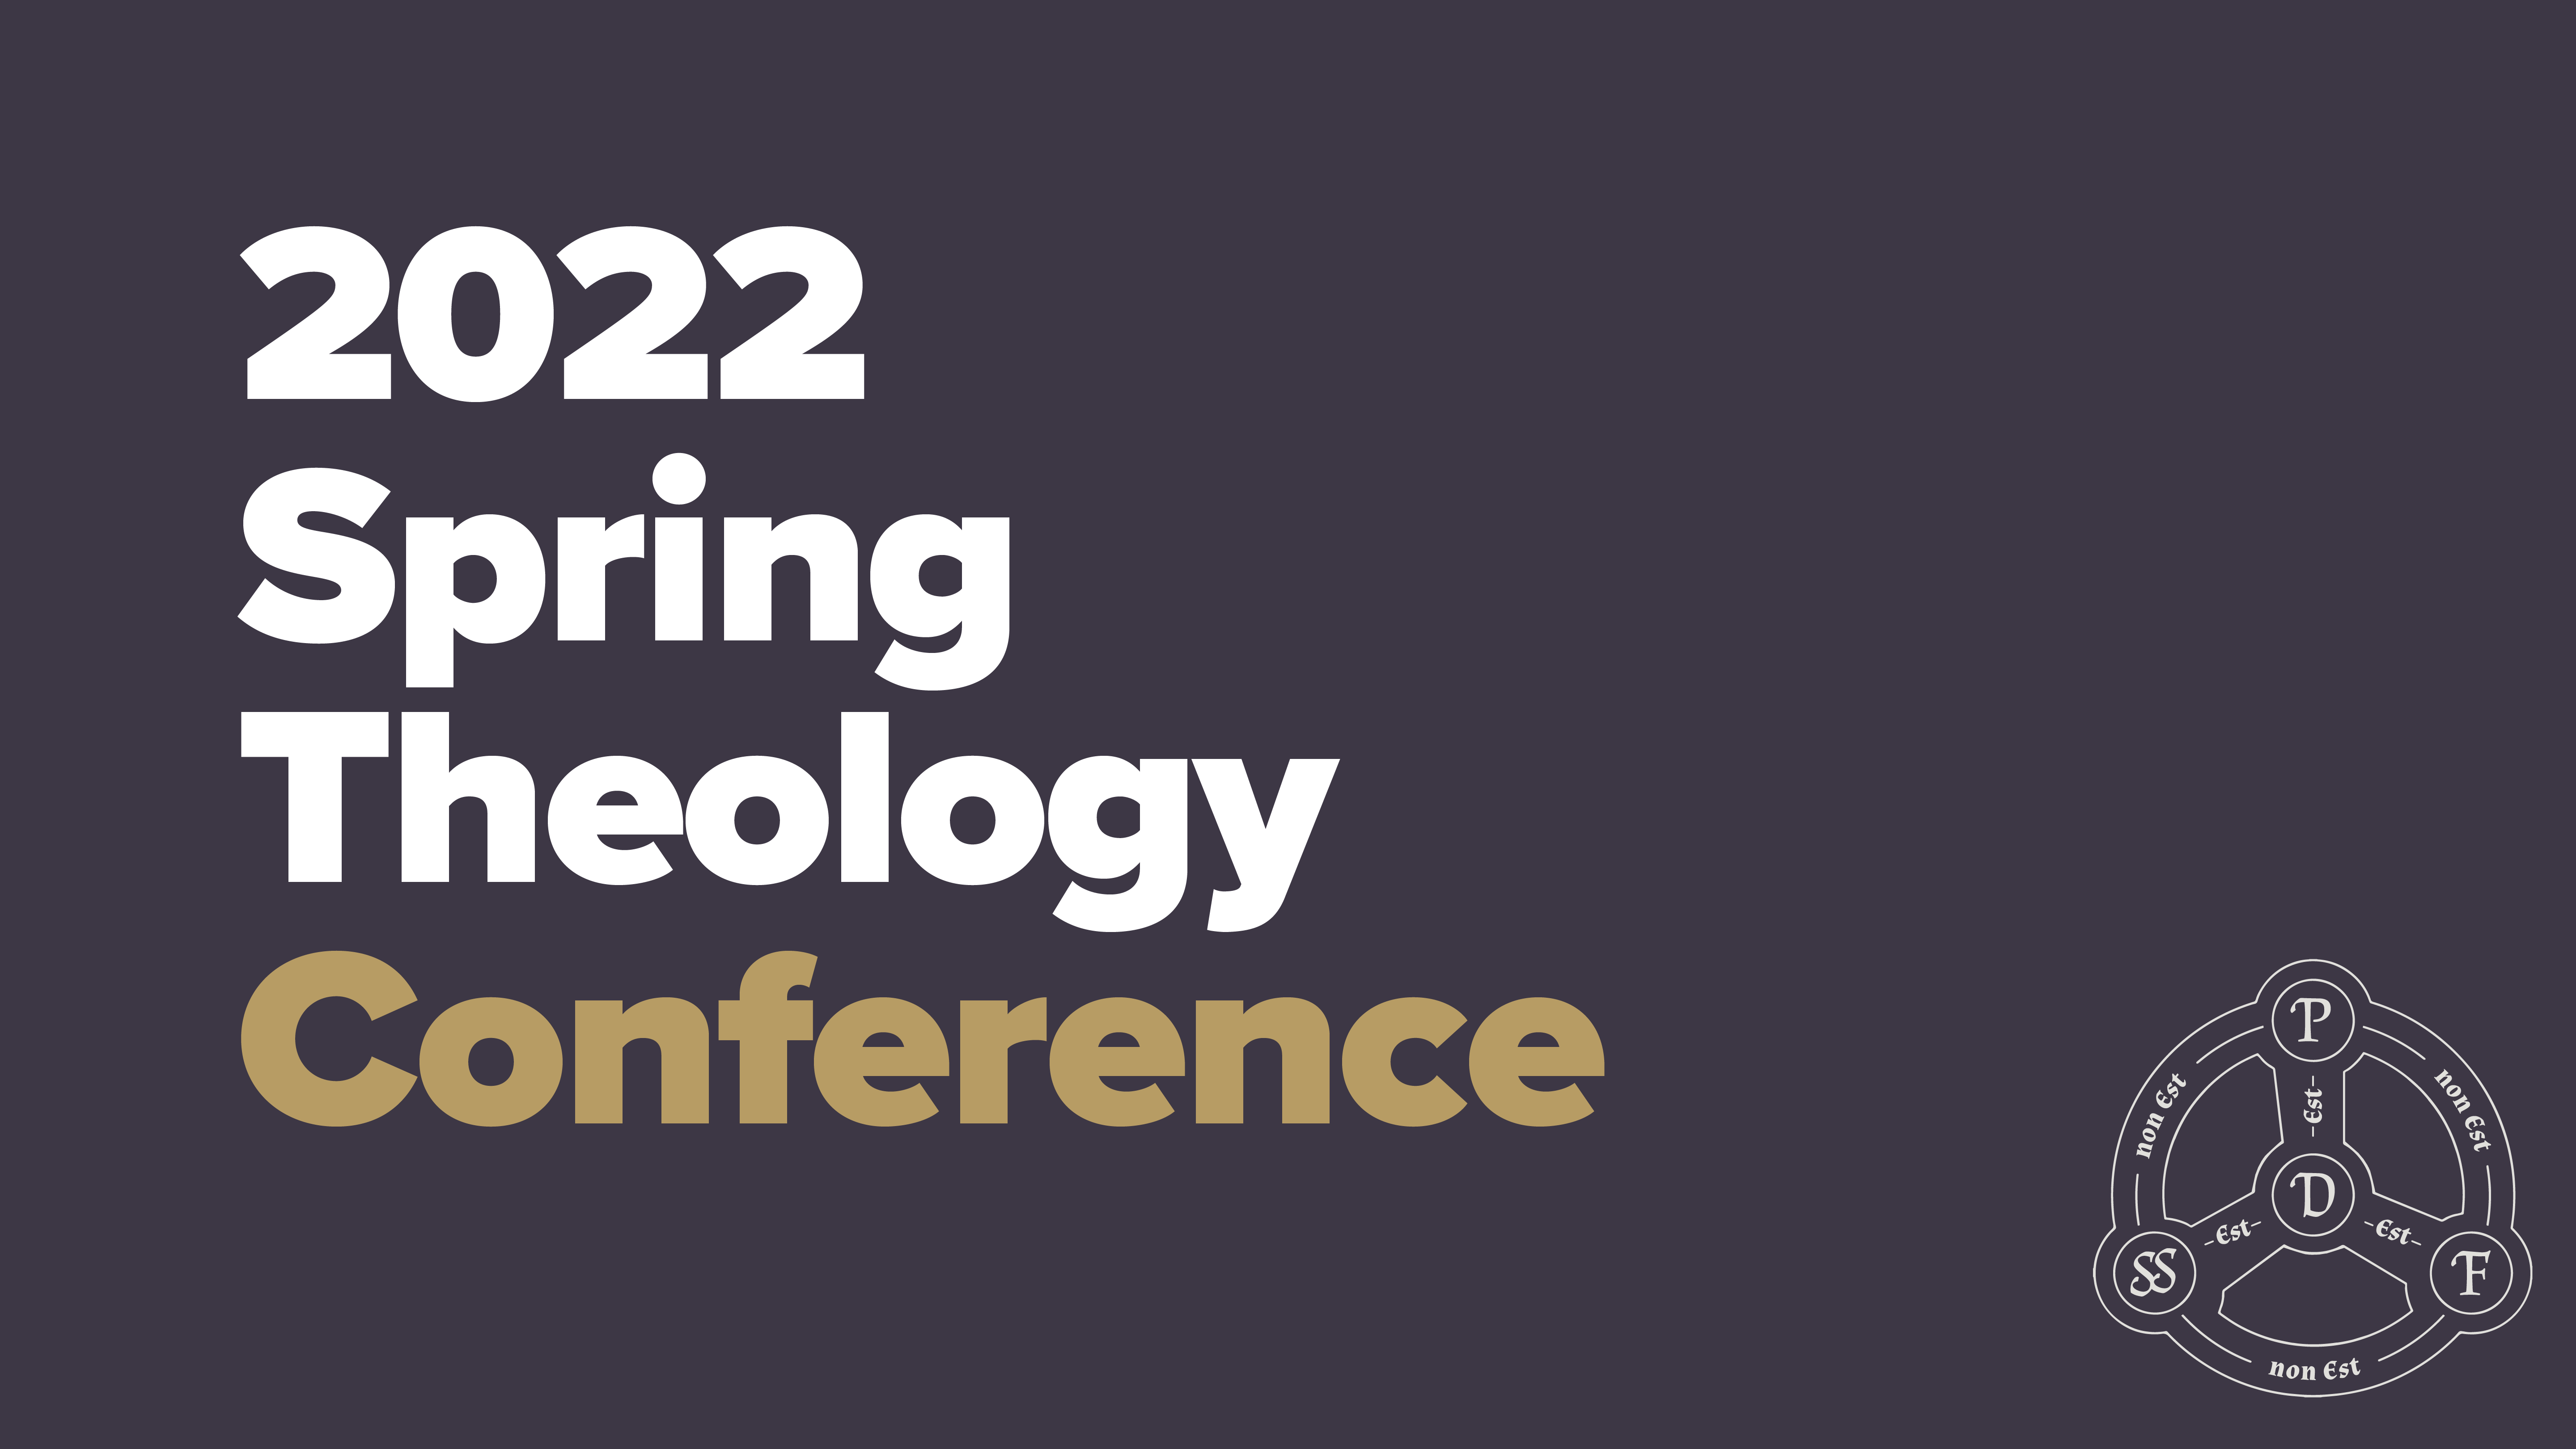 2022 Spring Theology Conference banner